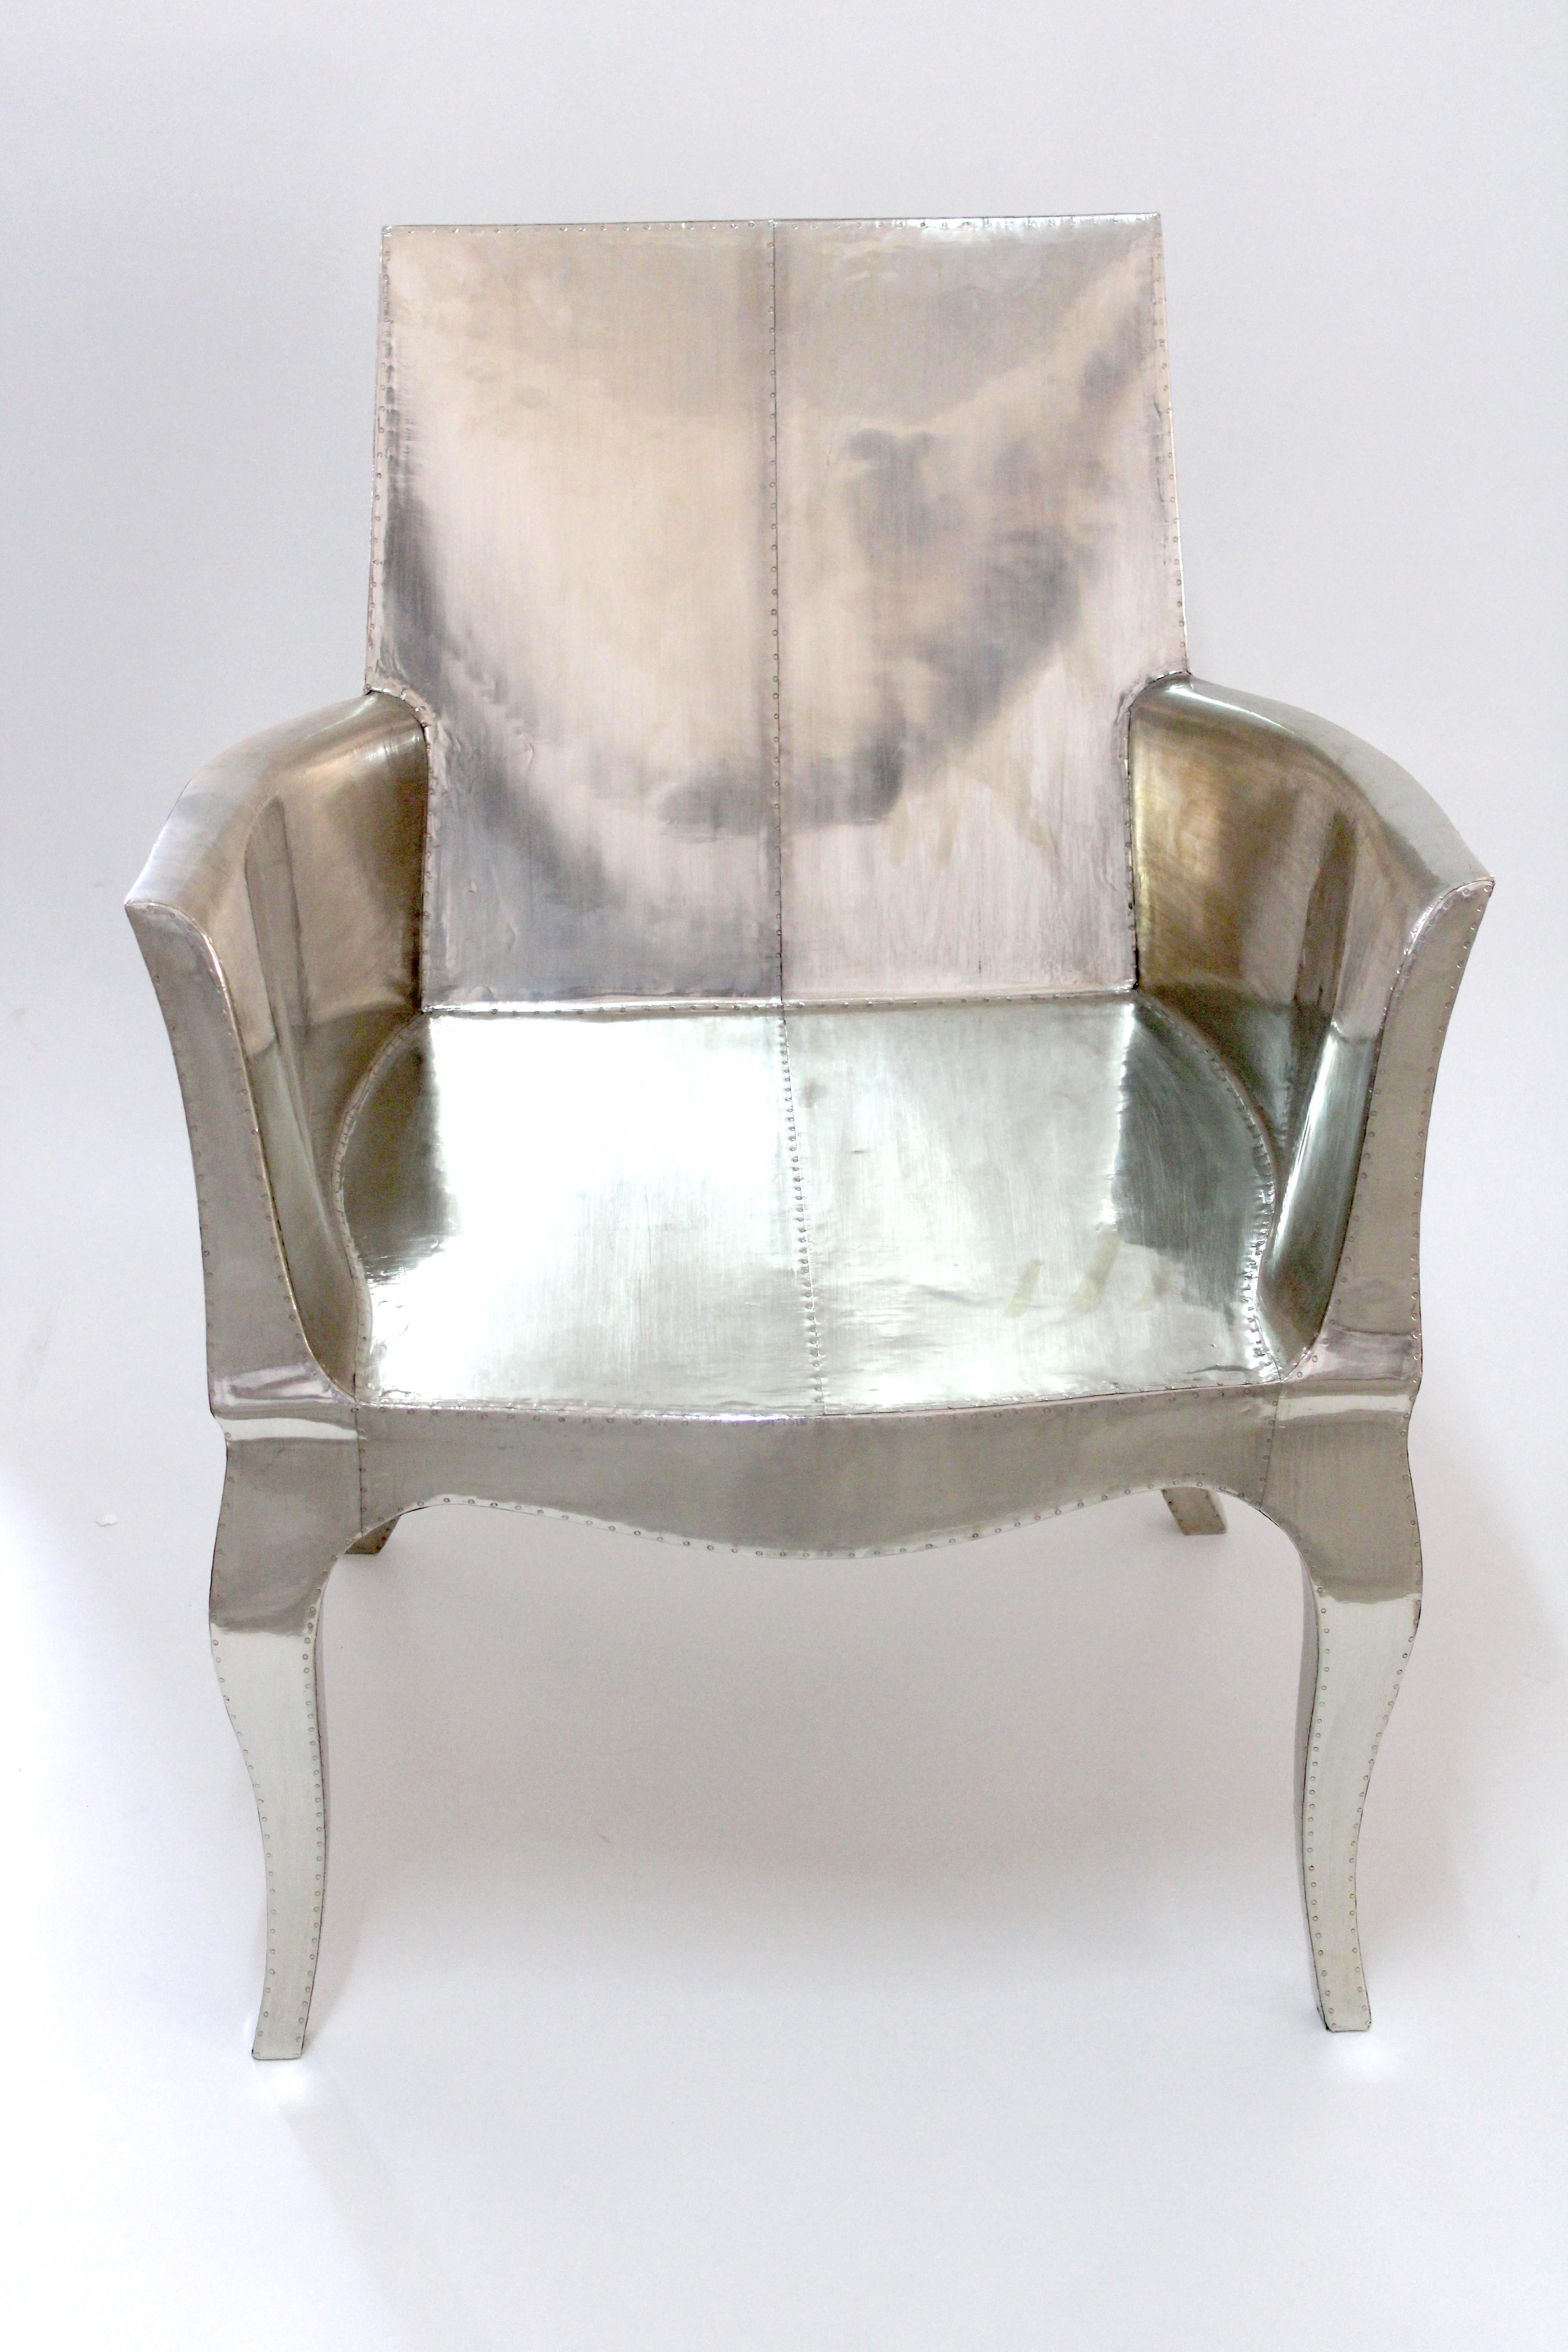 Teak Art Deco Office Chair in Smooth White Bronze by Paul Mathieu for S. Odegard For Sale